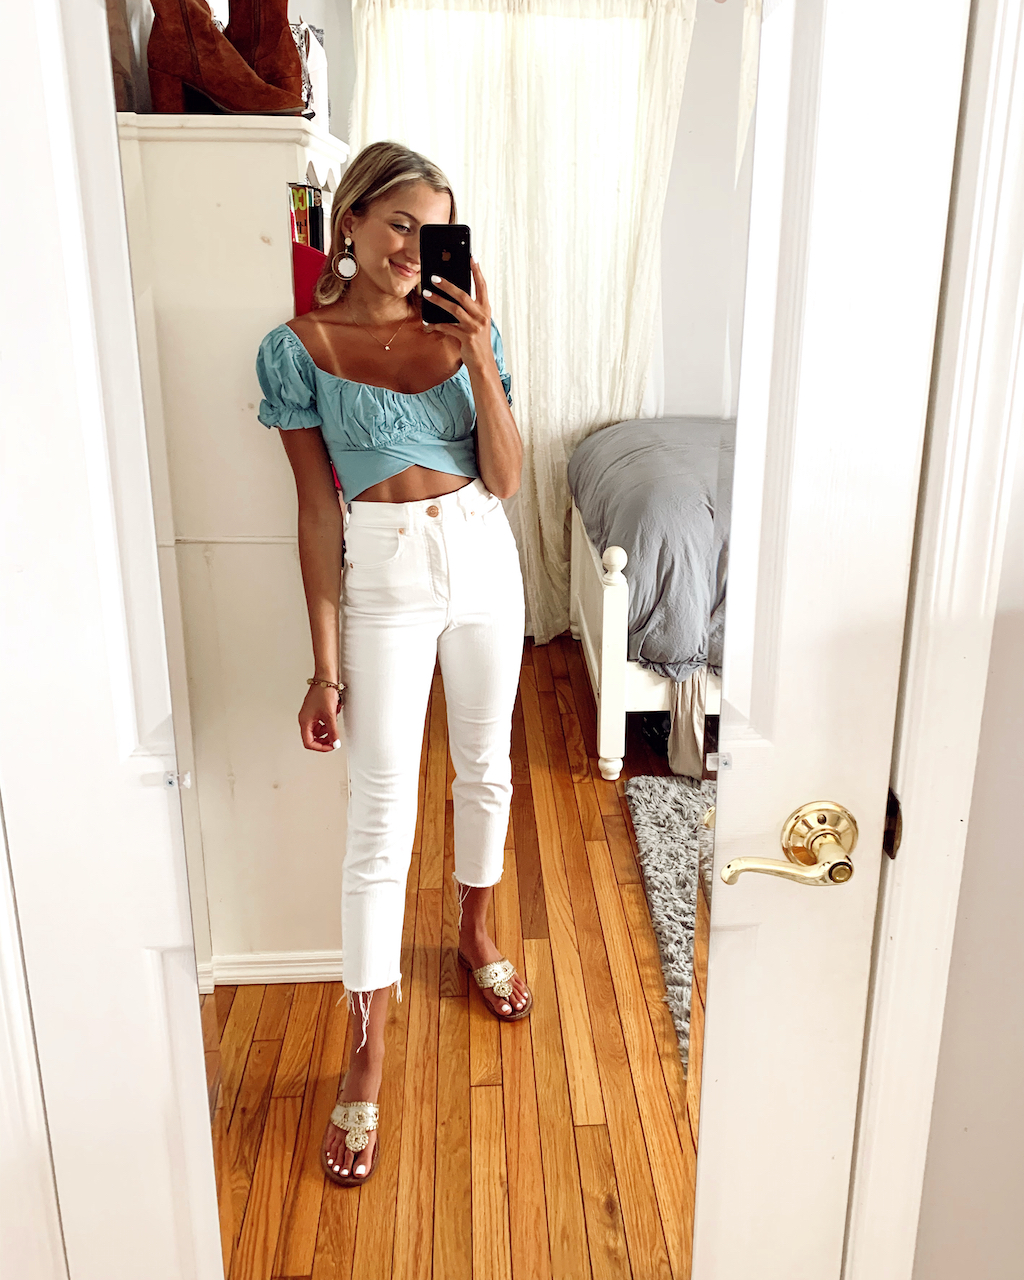 16 Date Night Outfit Ideas For The Summer – Styled by McKenz